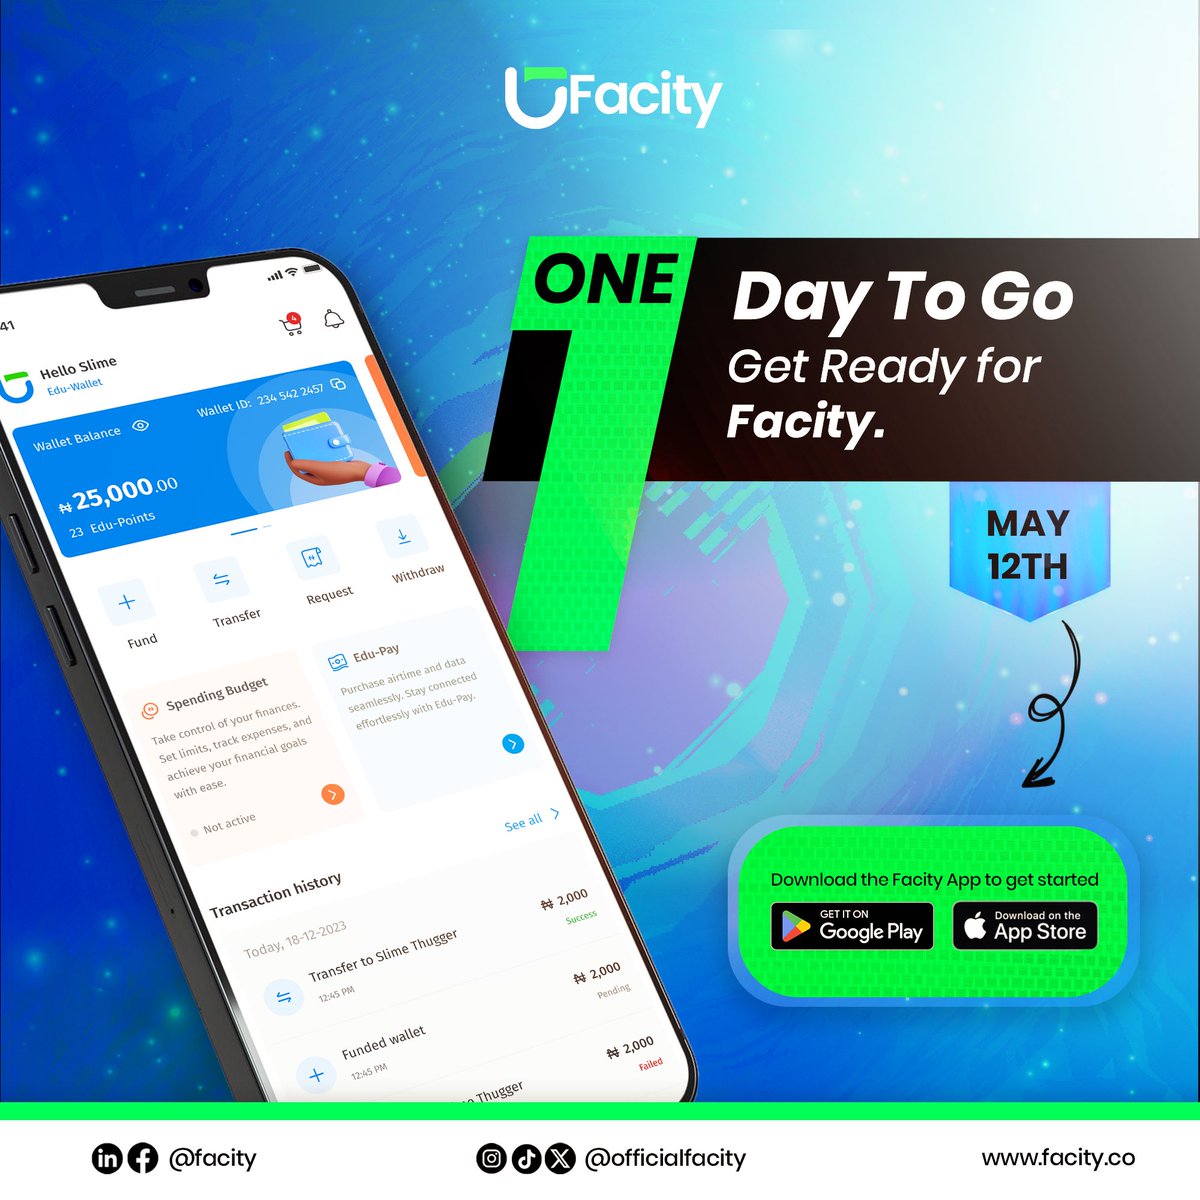 Tomorrow is the day we have all been waiting for 🎉☺️💯.

We are so enthusiastic and we hope you are too💃.

As a student, when you think about your academic journey, who comes to your mind? 

Tag them in the comment section and Spread the news 🔊…

#FacityLaunch #1daytogo